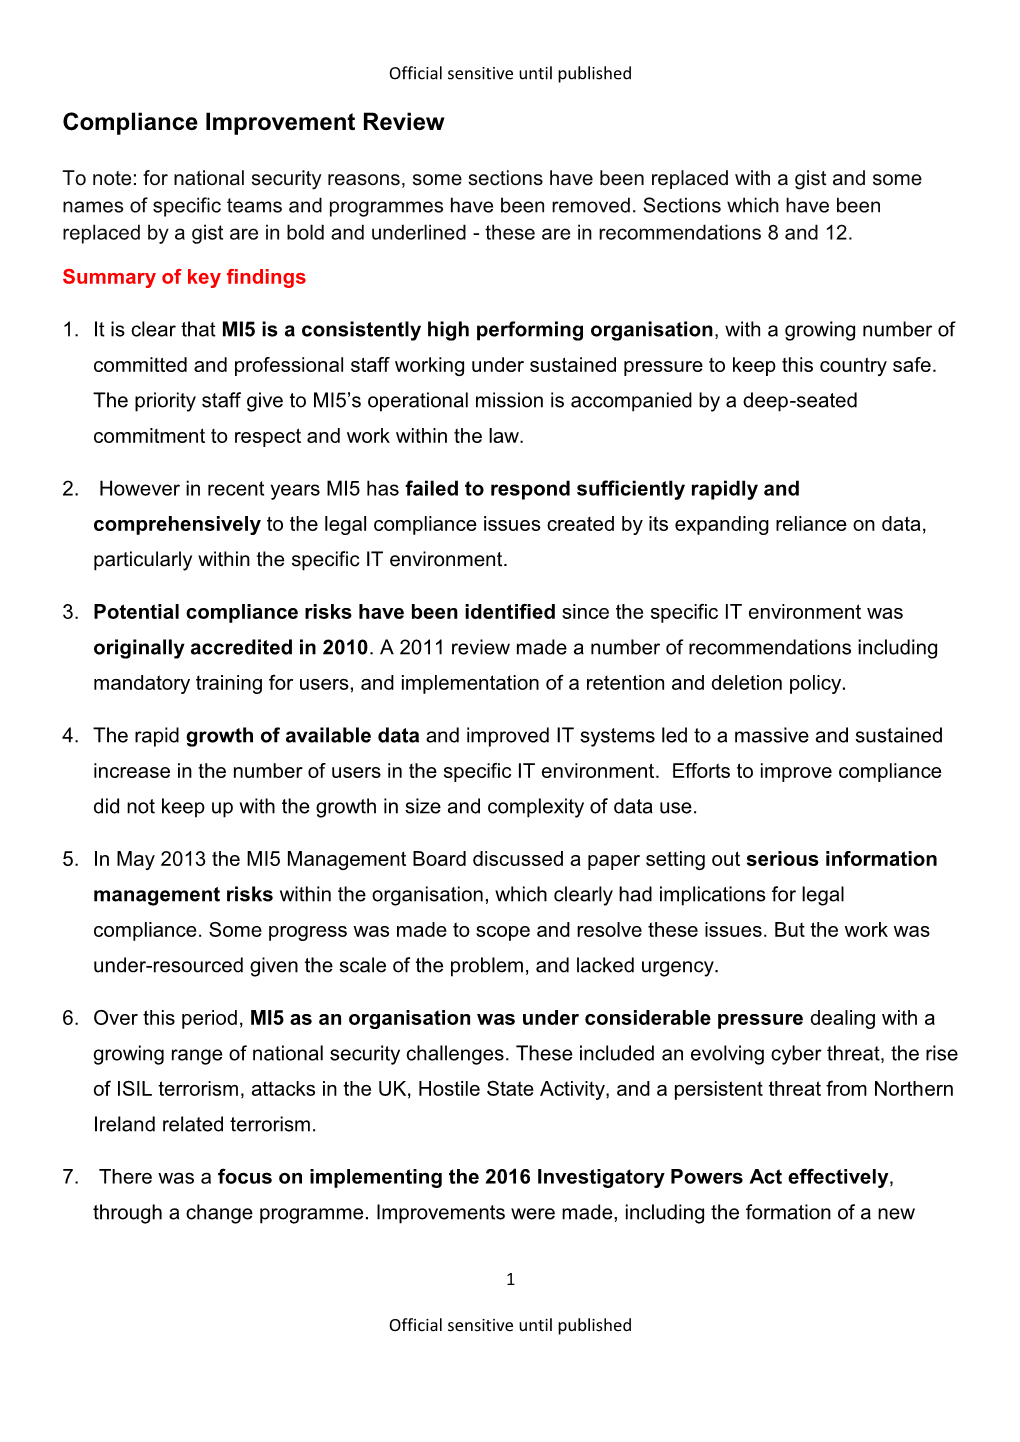 Summary of Independant Review of MI5 Compliance June 2019